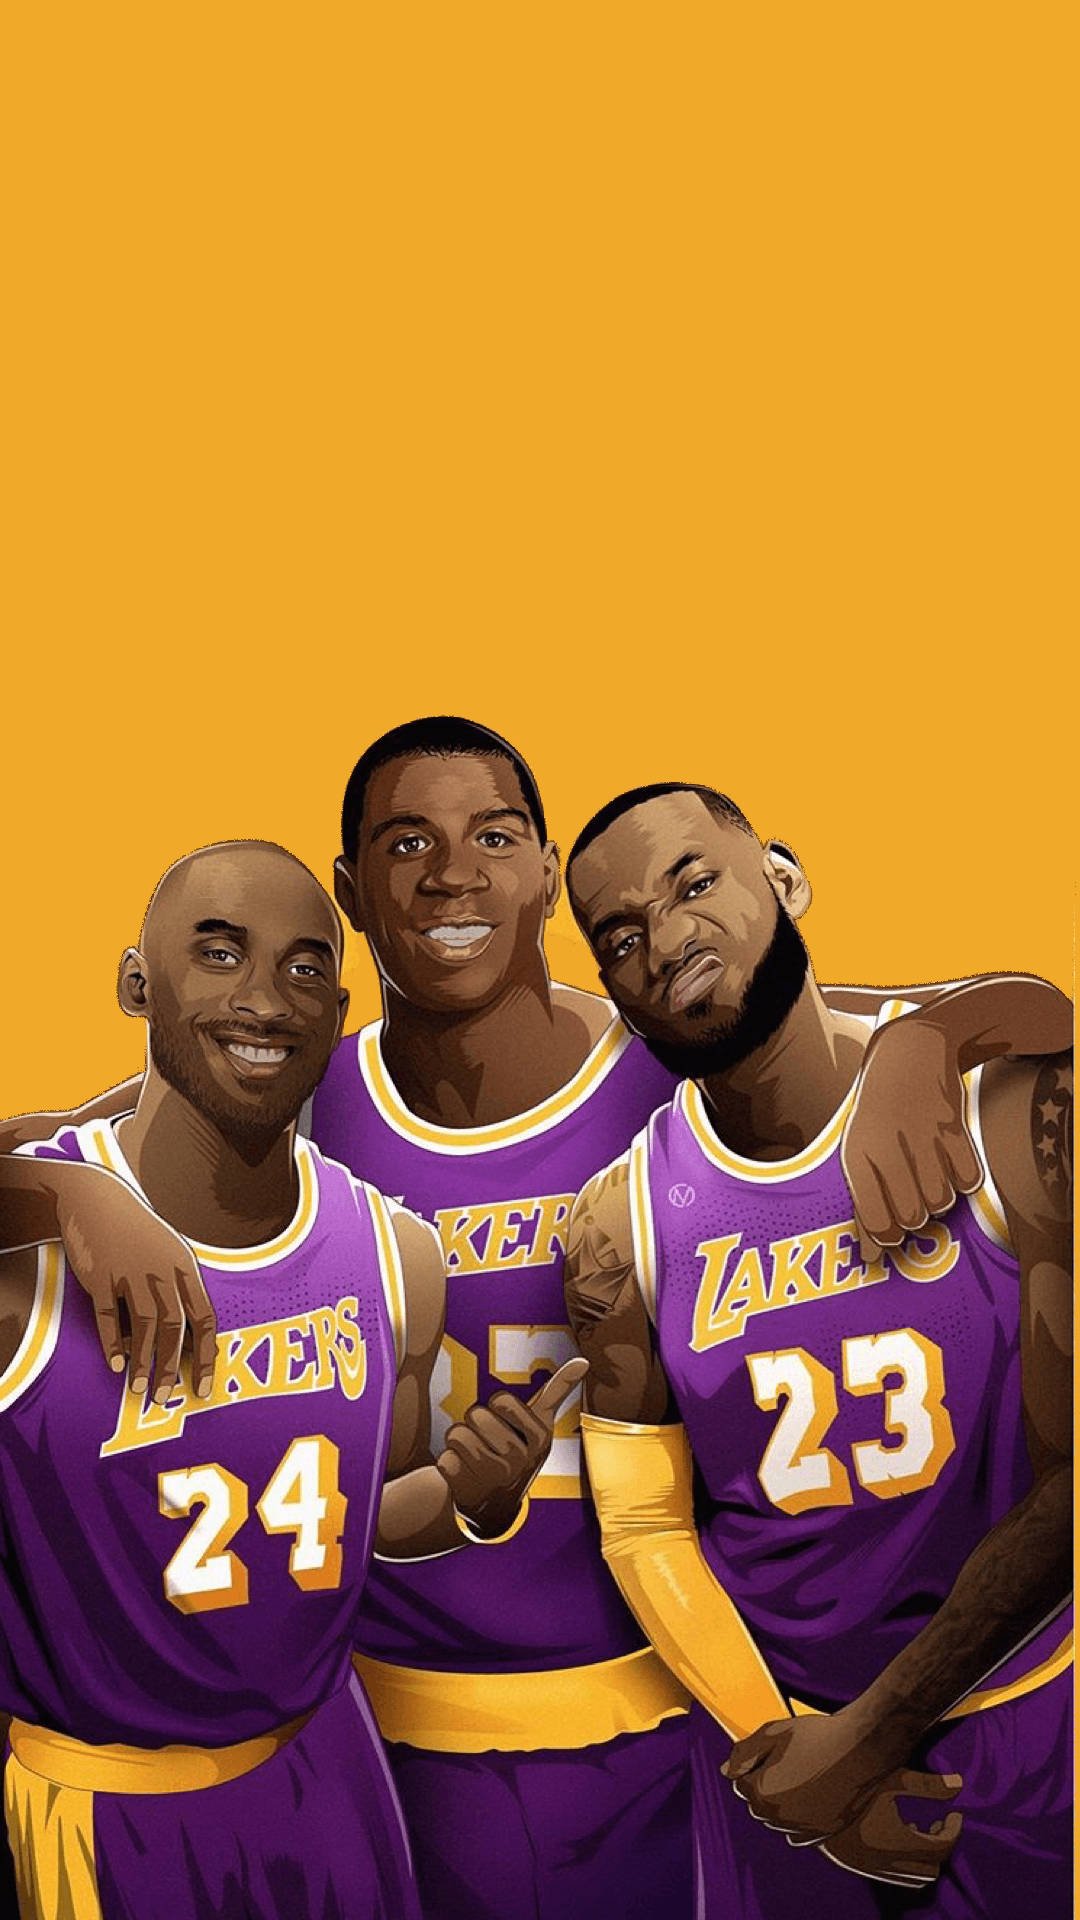 "The iconic Lakers proudly displayed on your iPhone!" Wallpaper